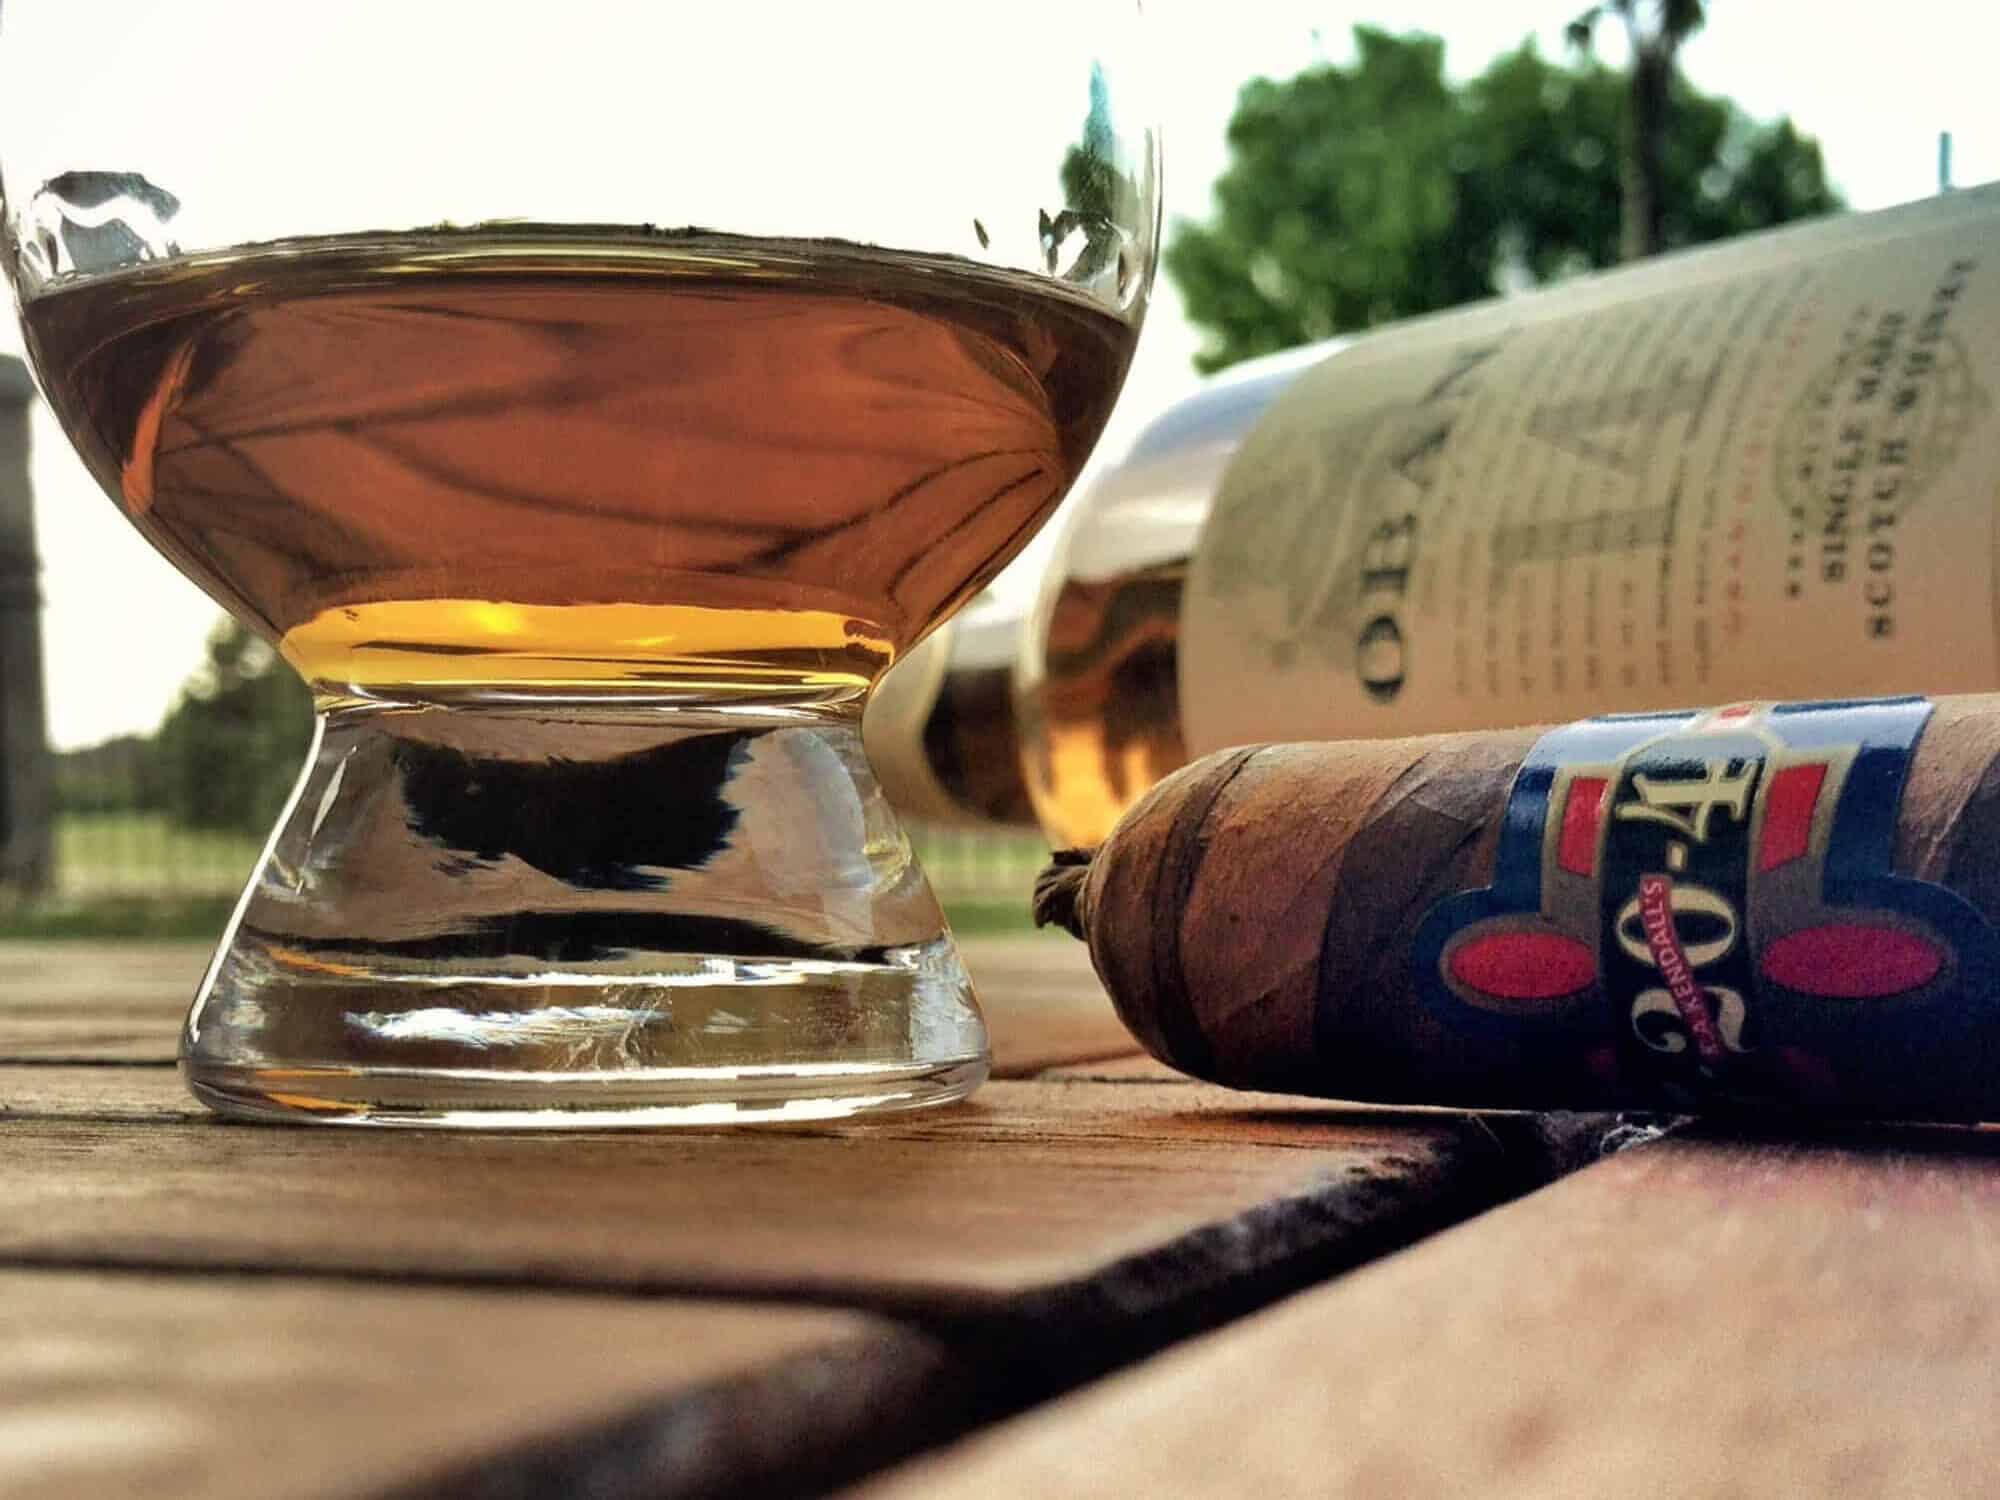 Scotch and cigars is a great way to spend an evening